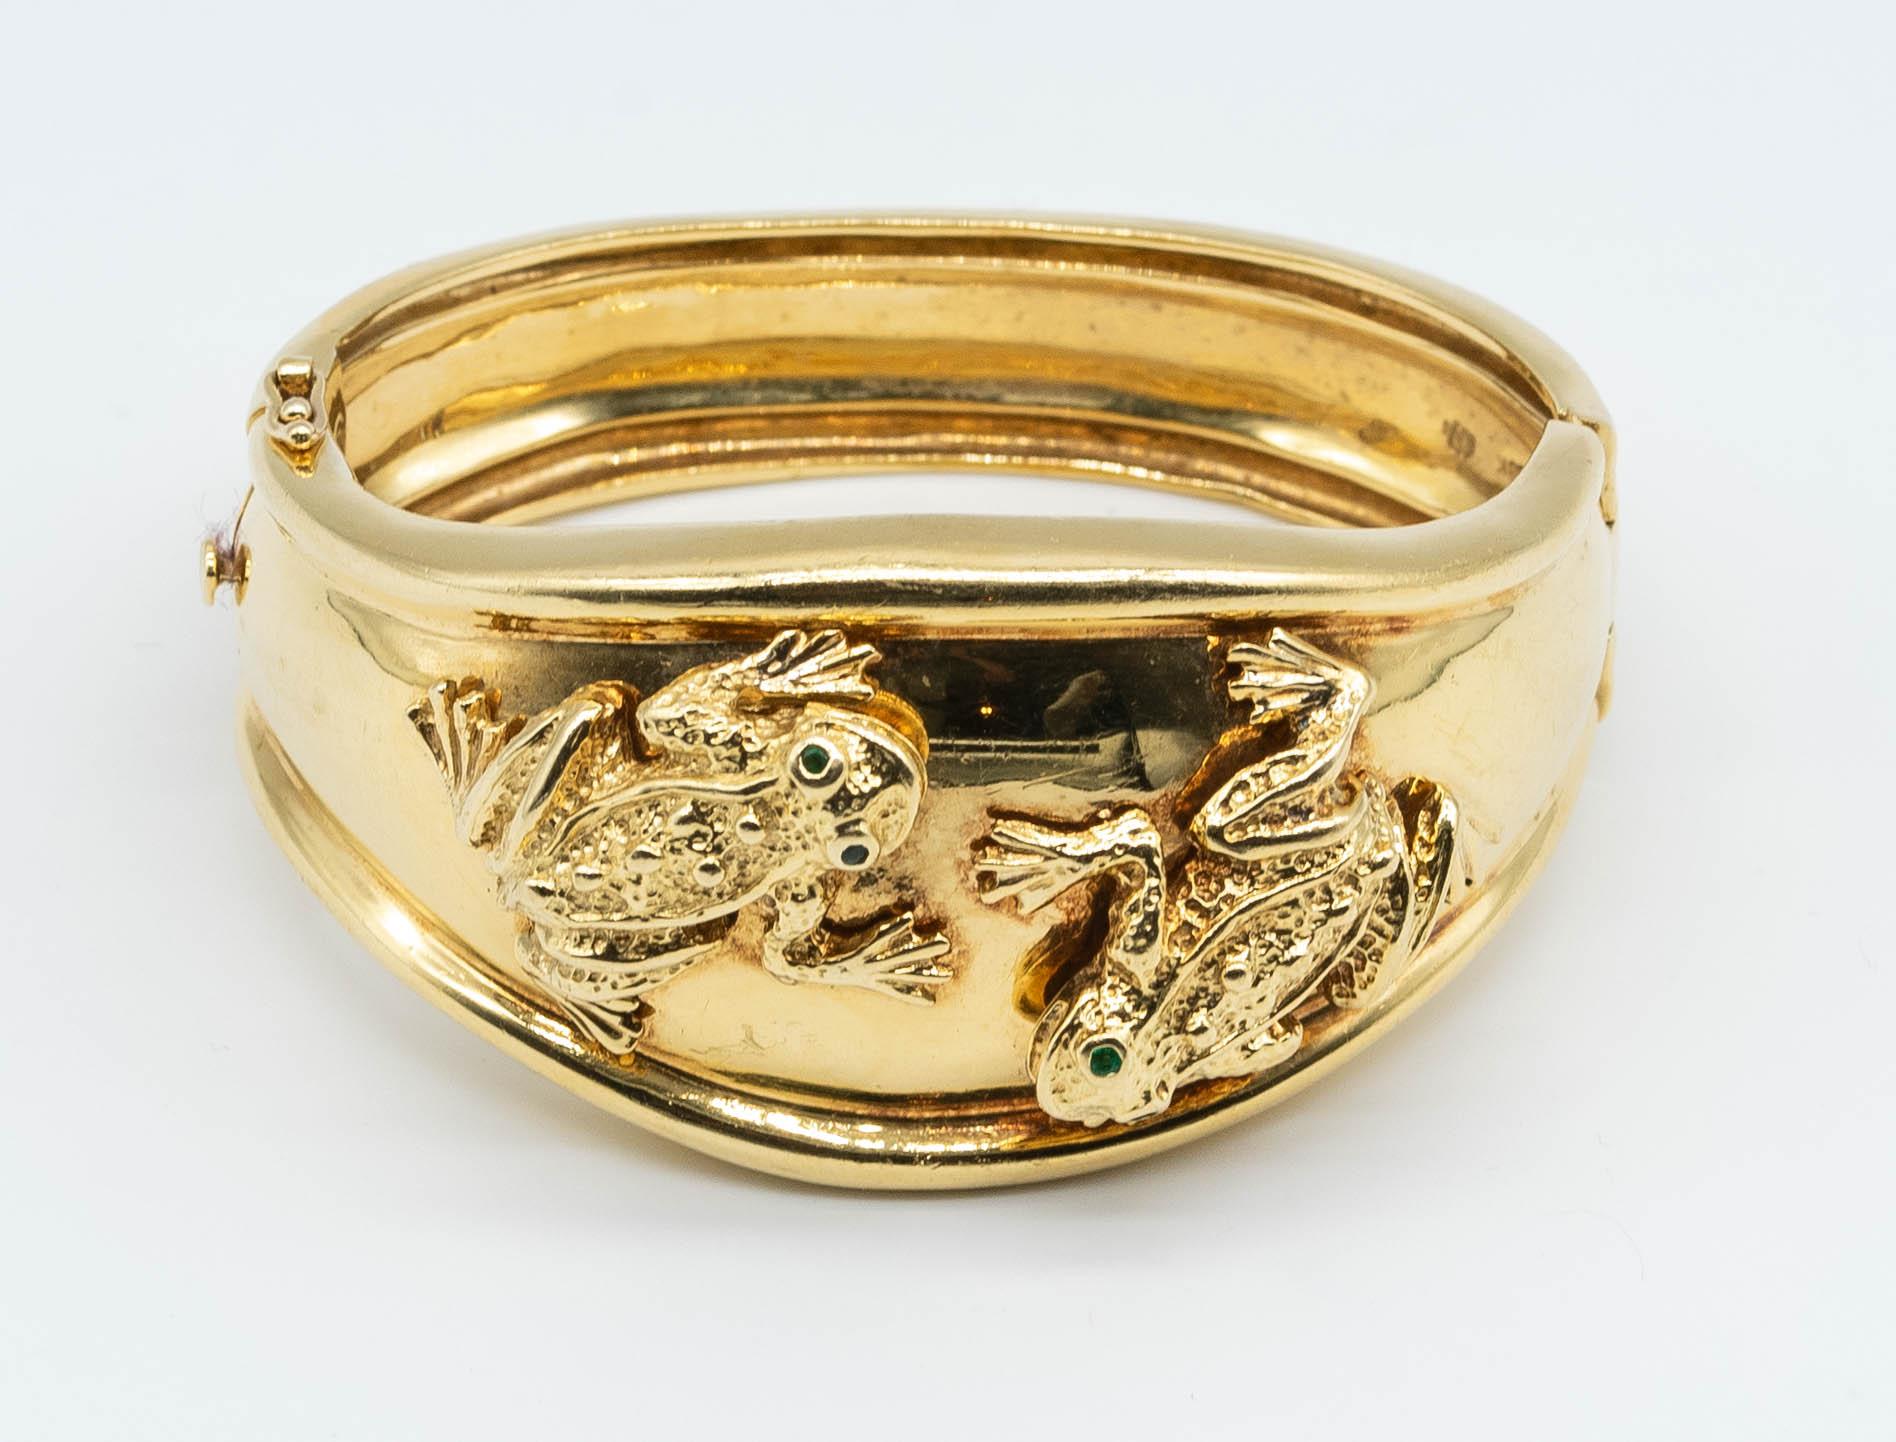 Frog motifs have been present in design for thousands of years.  This wee amphibian comes rife with symbolism: good luck, prosperity, fertility, happiness, and one sees it in numerous cultures.  In this case,  two beautifully crafted gold frogs